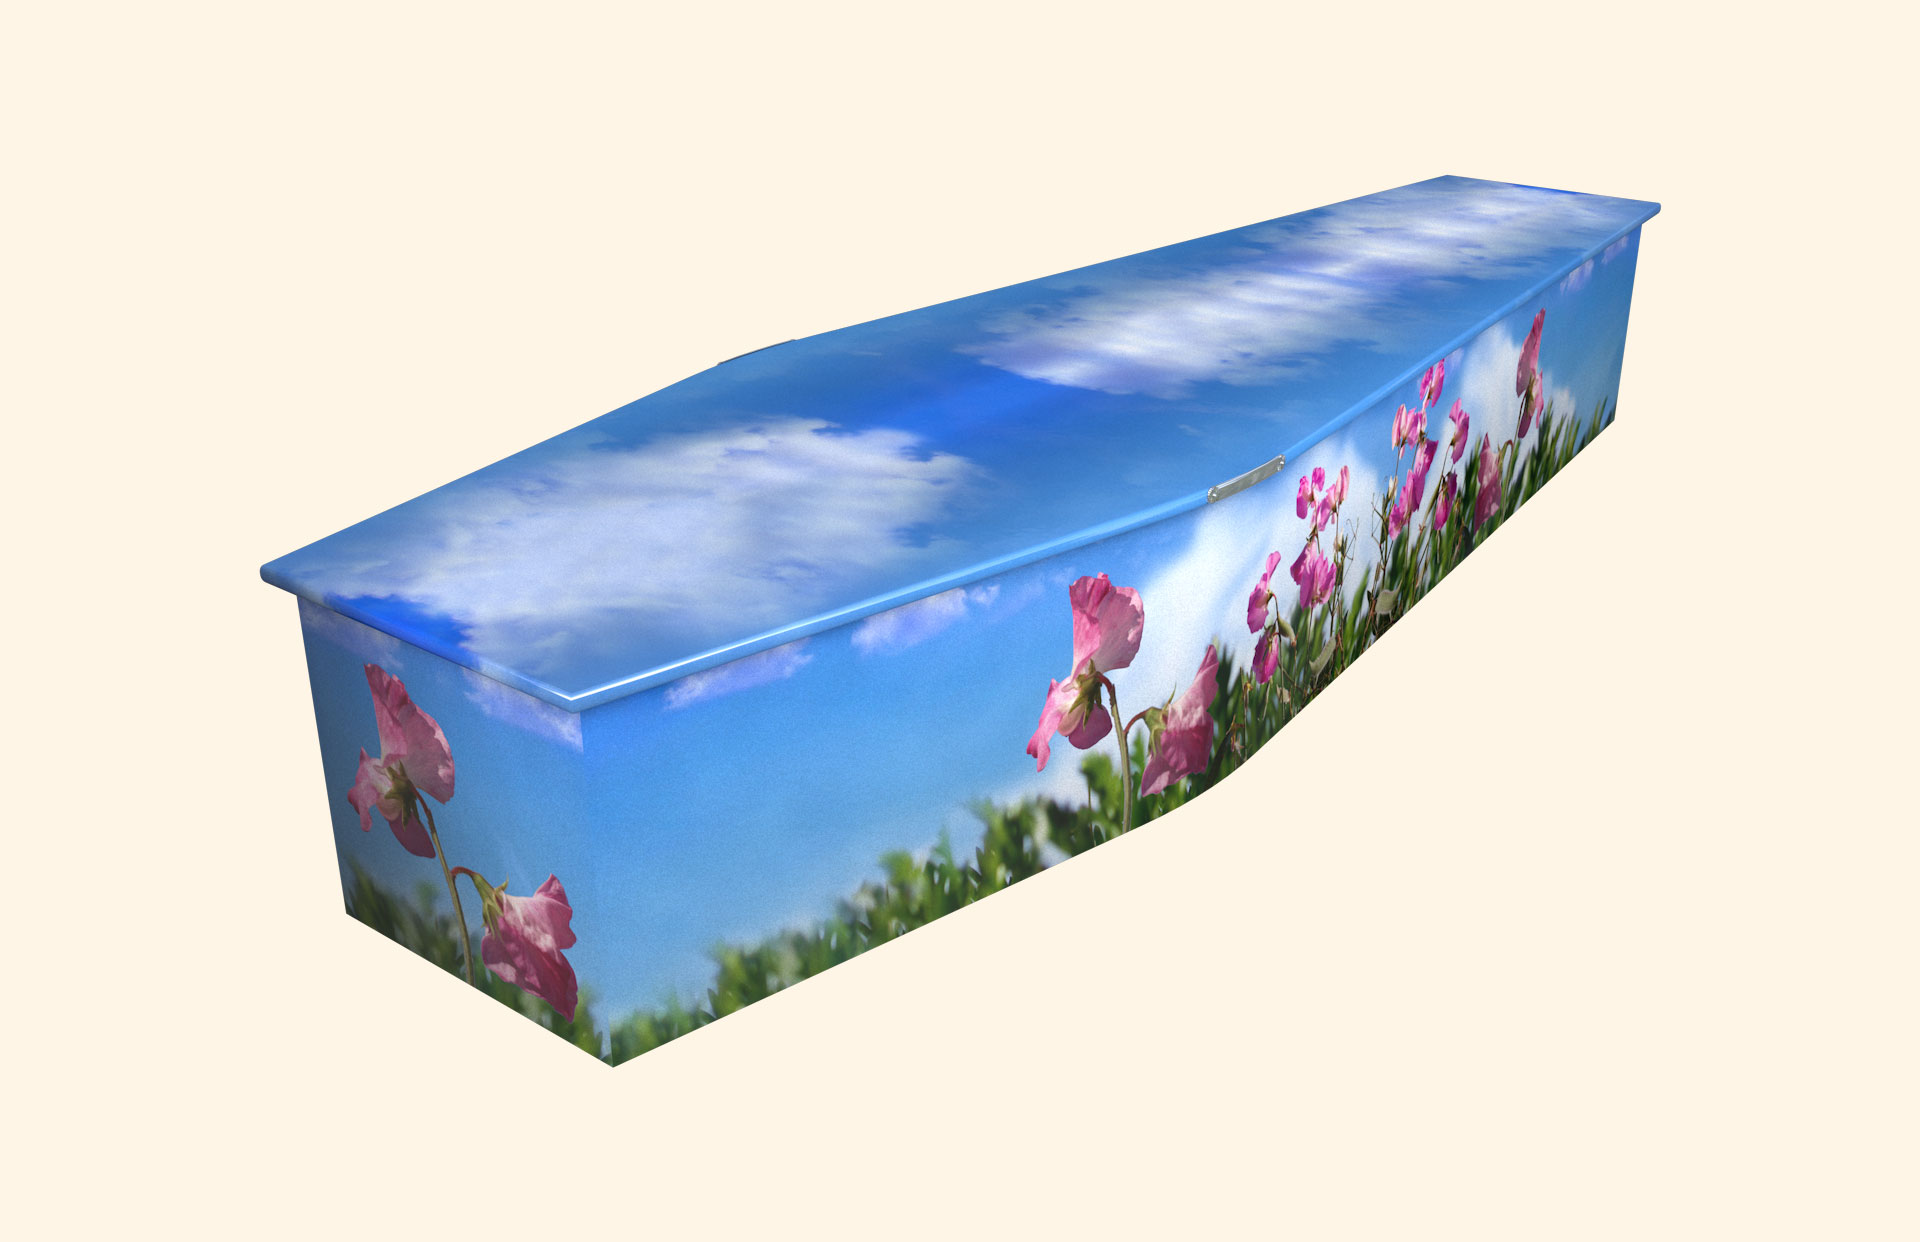 Sweet Peas design on a traditional coffin